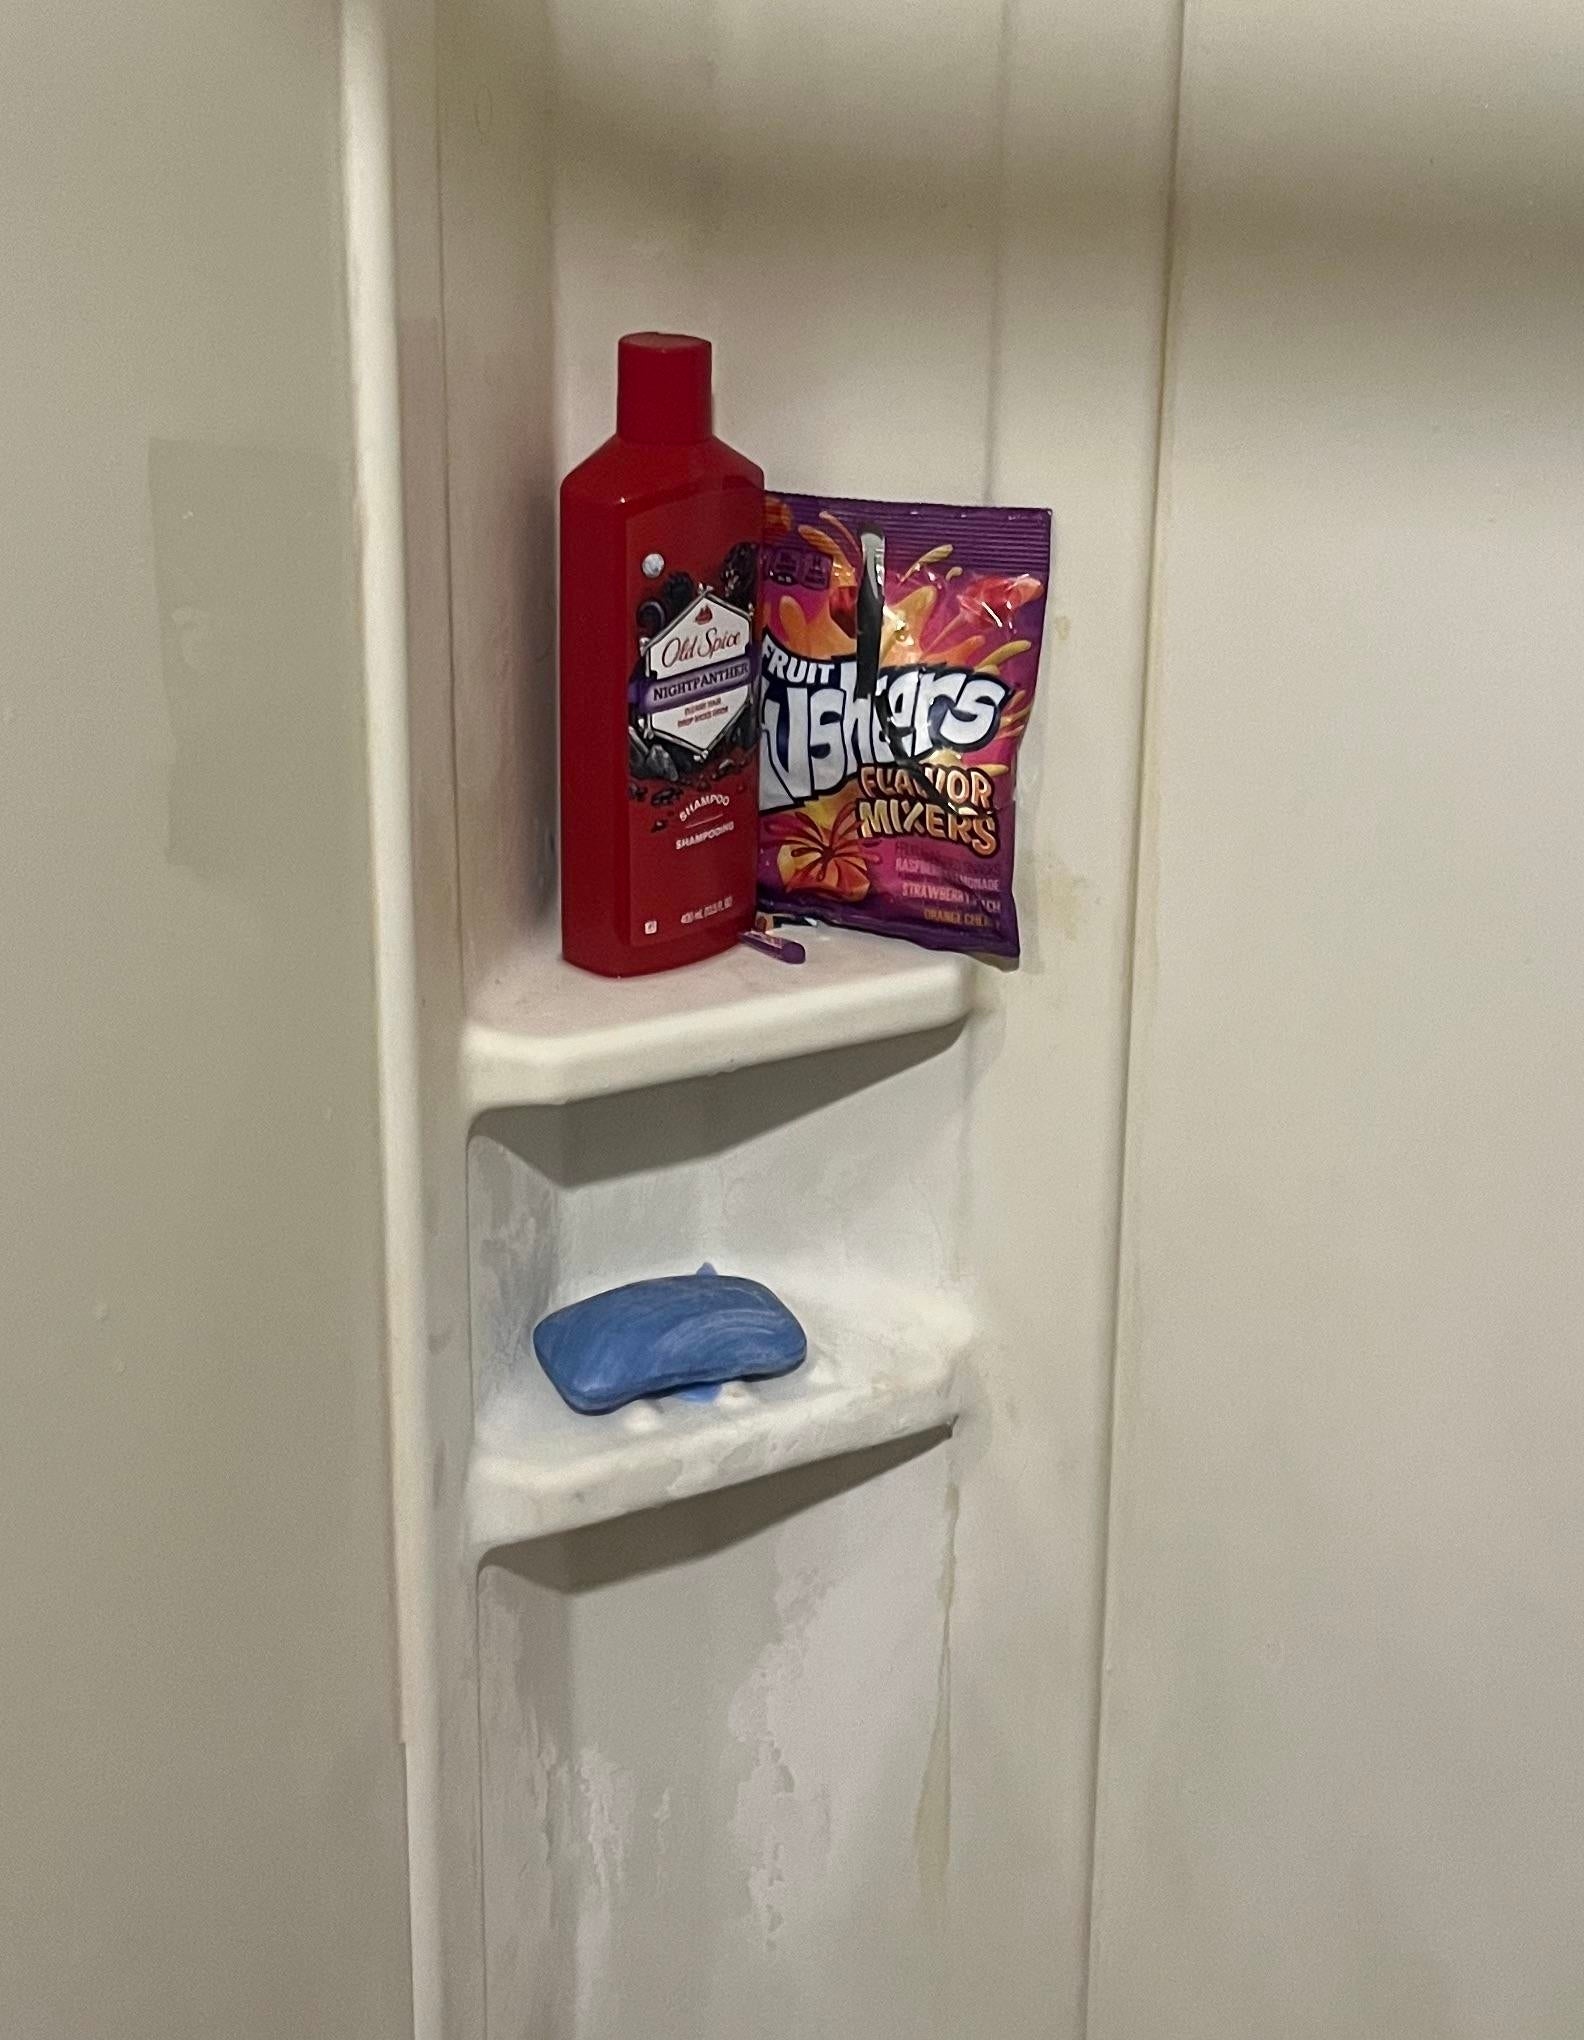 Shower caddy with various personal care products and a packet of candy